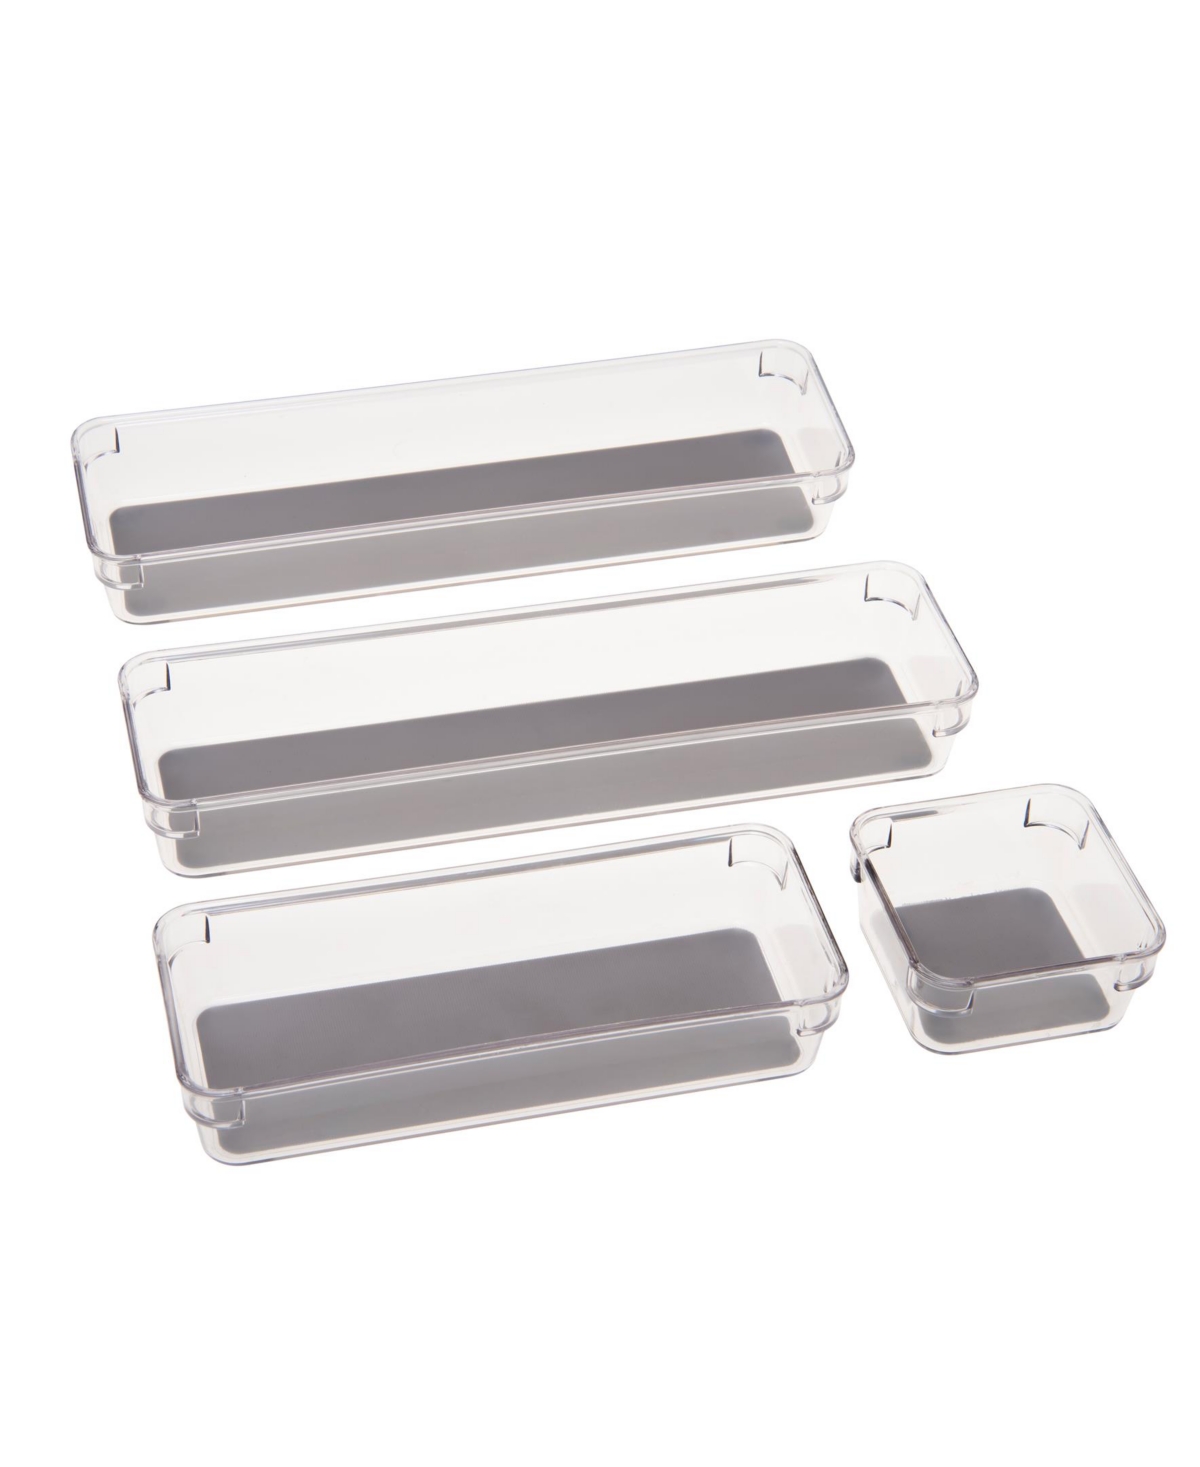 Multipurpose Drawer Organizers, 4 Pack - Open Miscellaneous